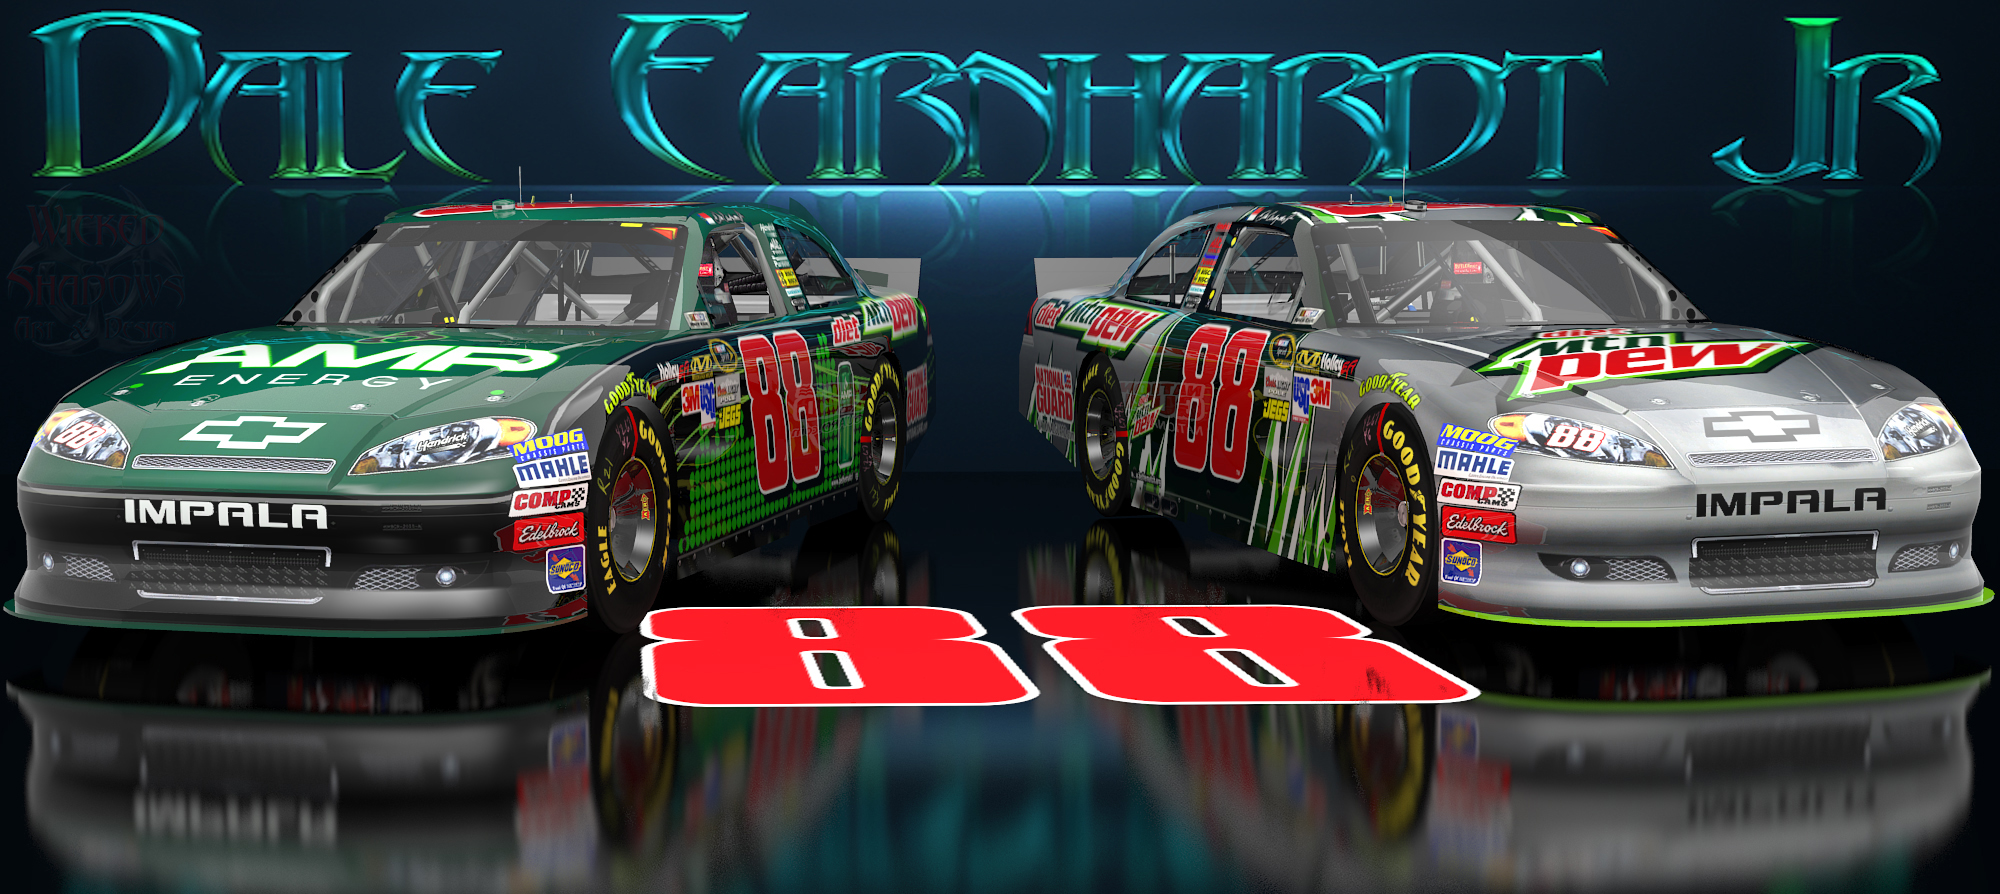 Image Of Wallpaper By Wicked Shadows Nascar Html